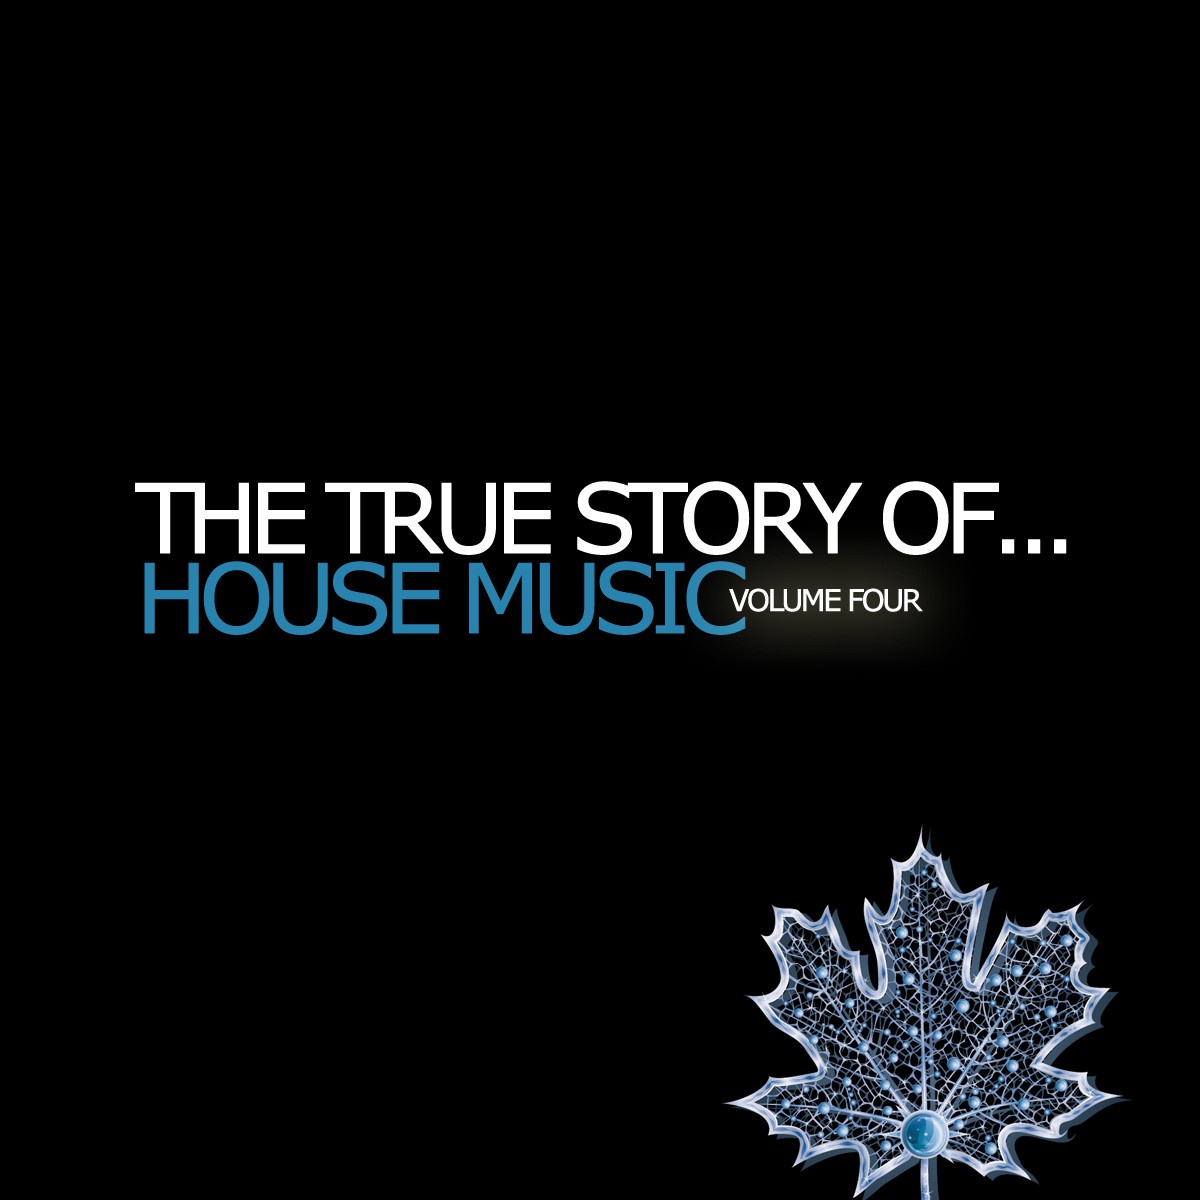 The True Story of...House Music Vol. 4